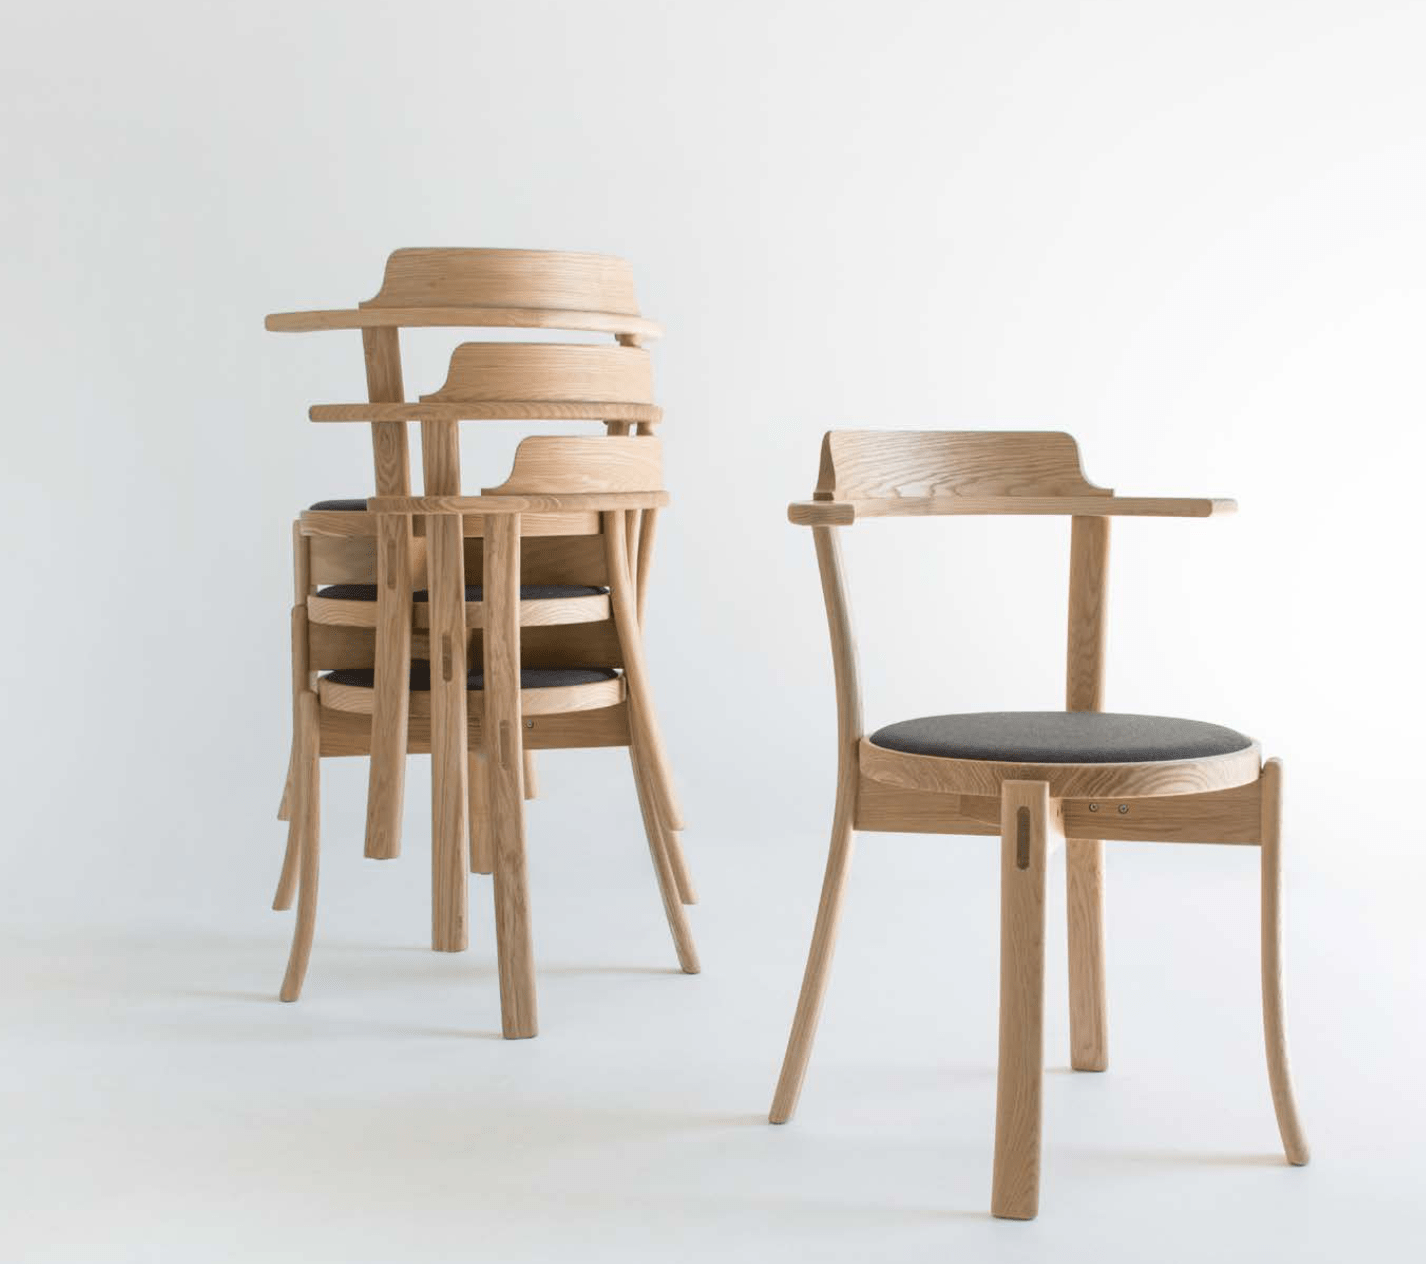 Darby chair, easily stackable. Crafted by CondeHouse, available at shopjapandi.com